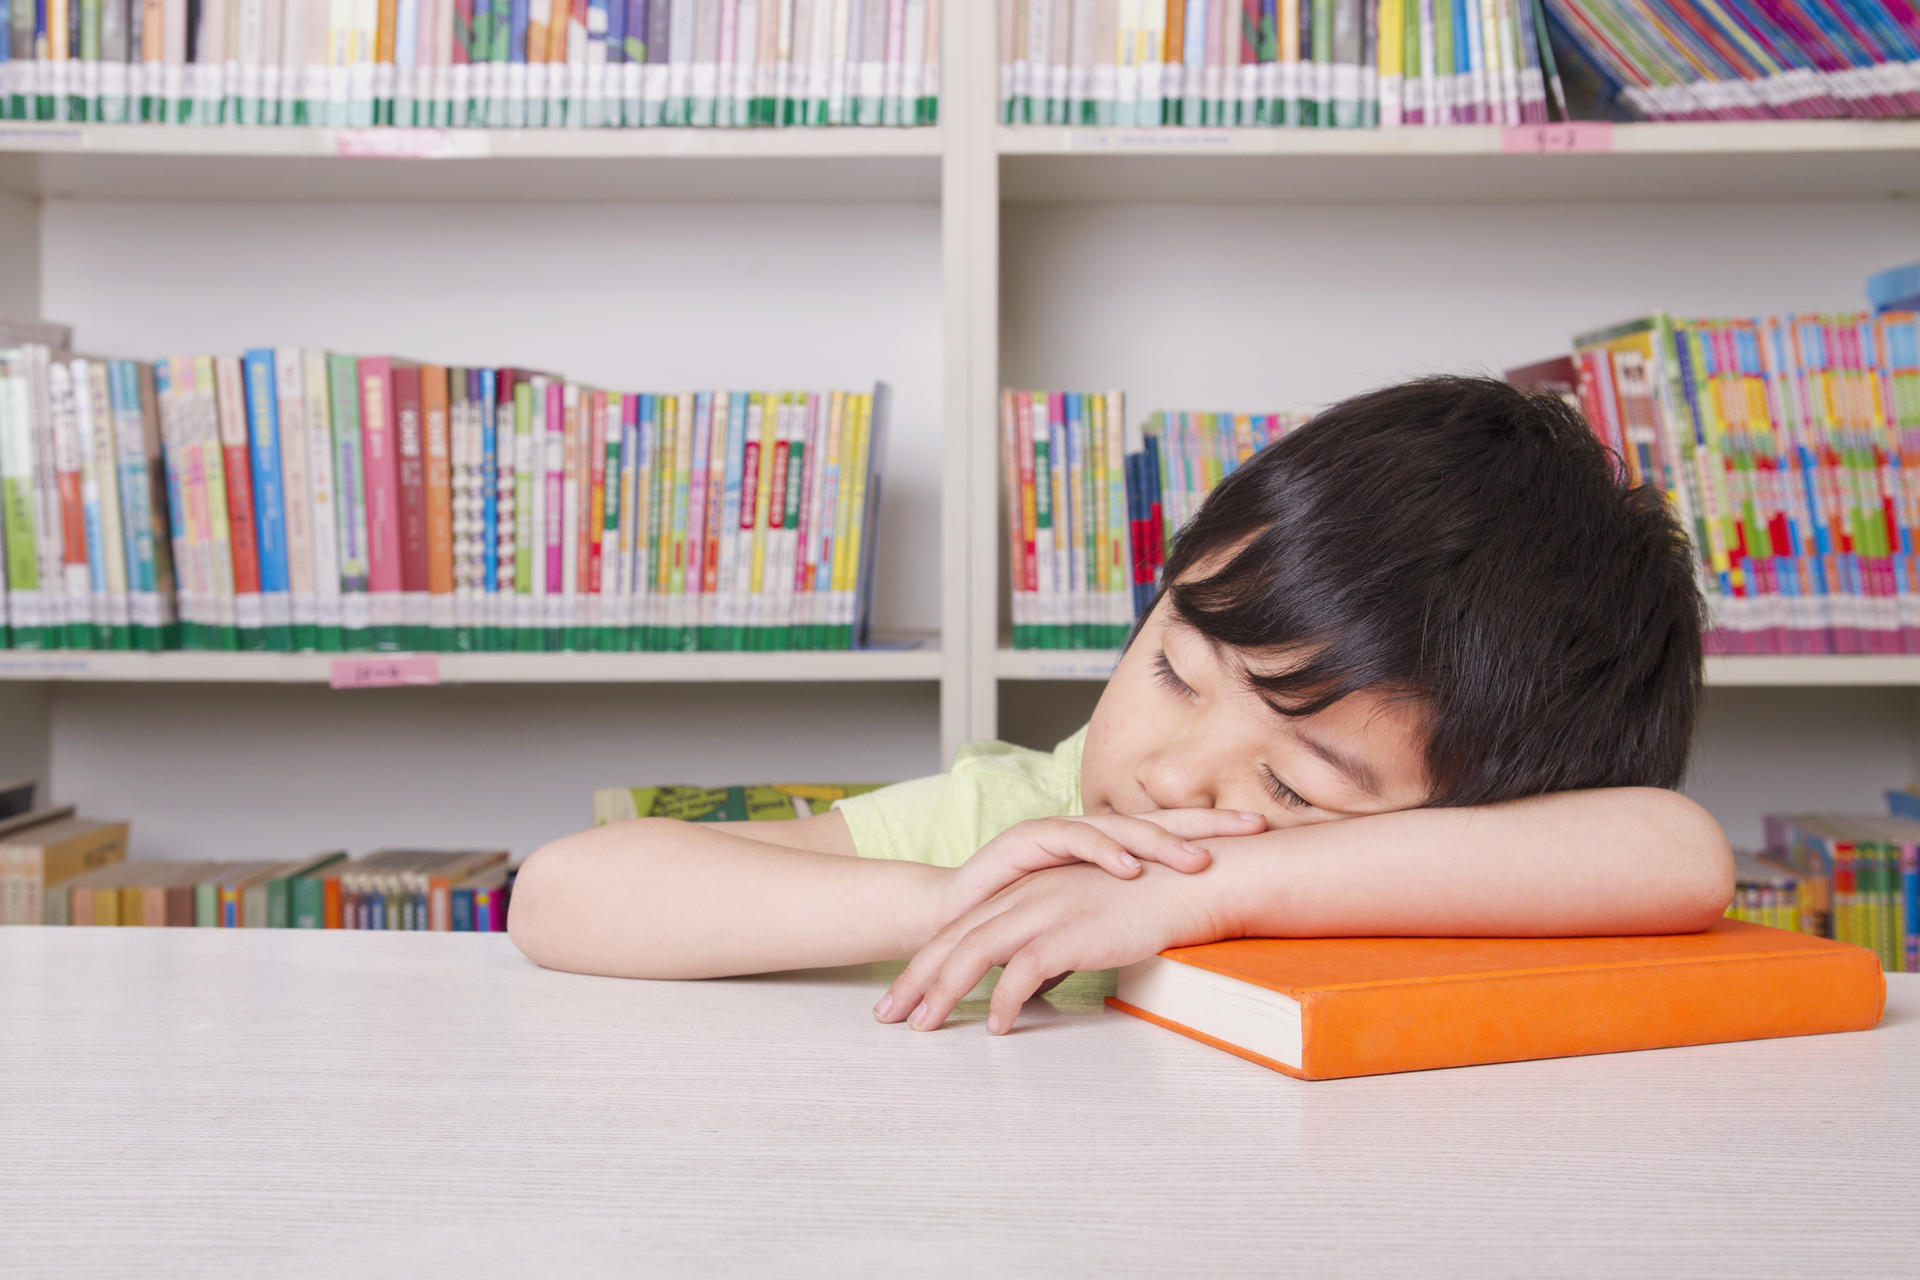 Children can tire themselves out by trying to impress. Photo: Corbis